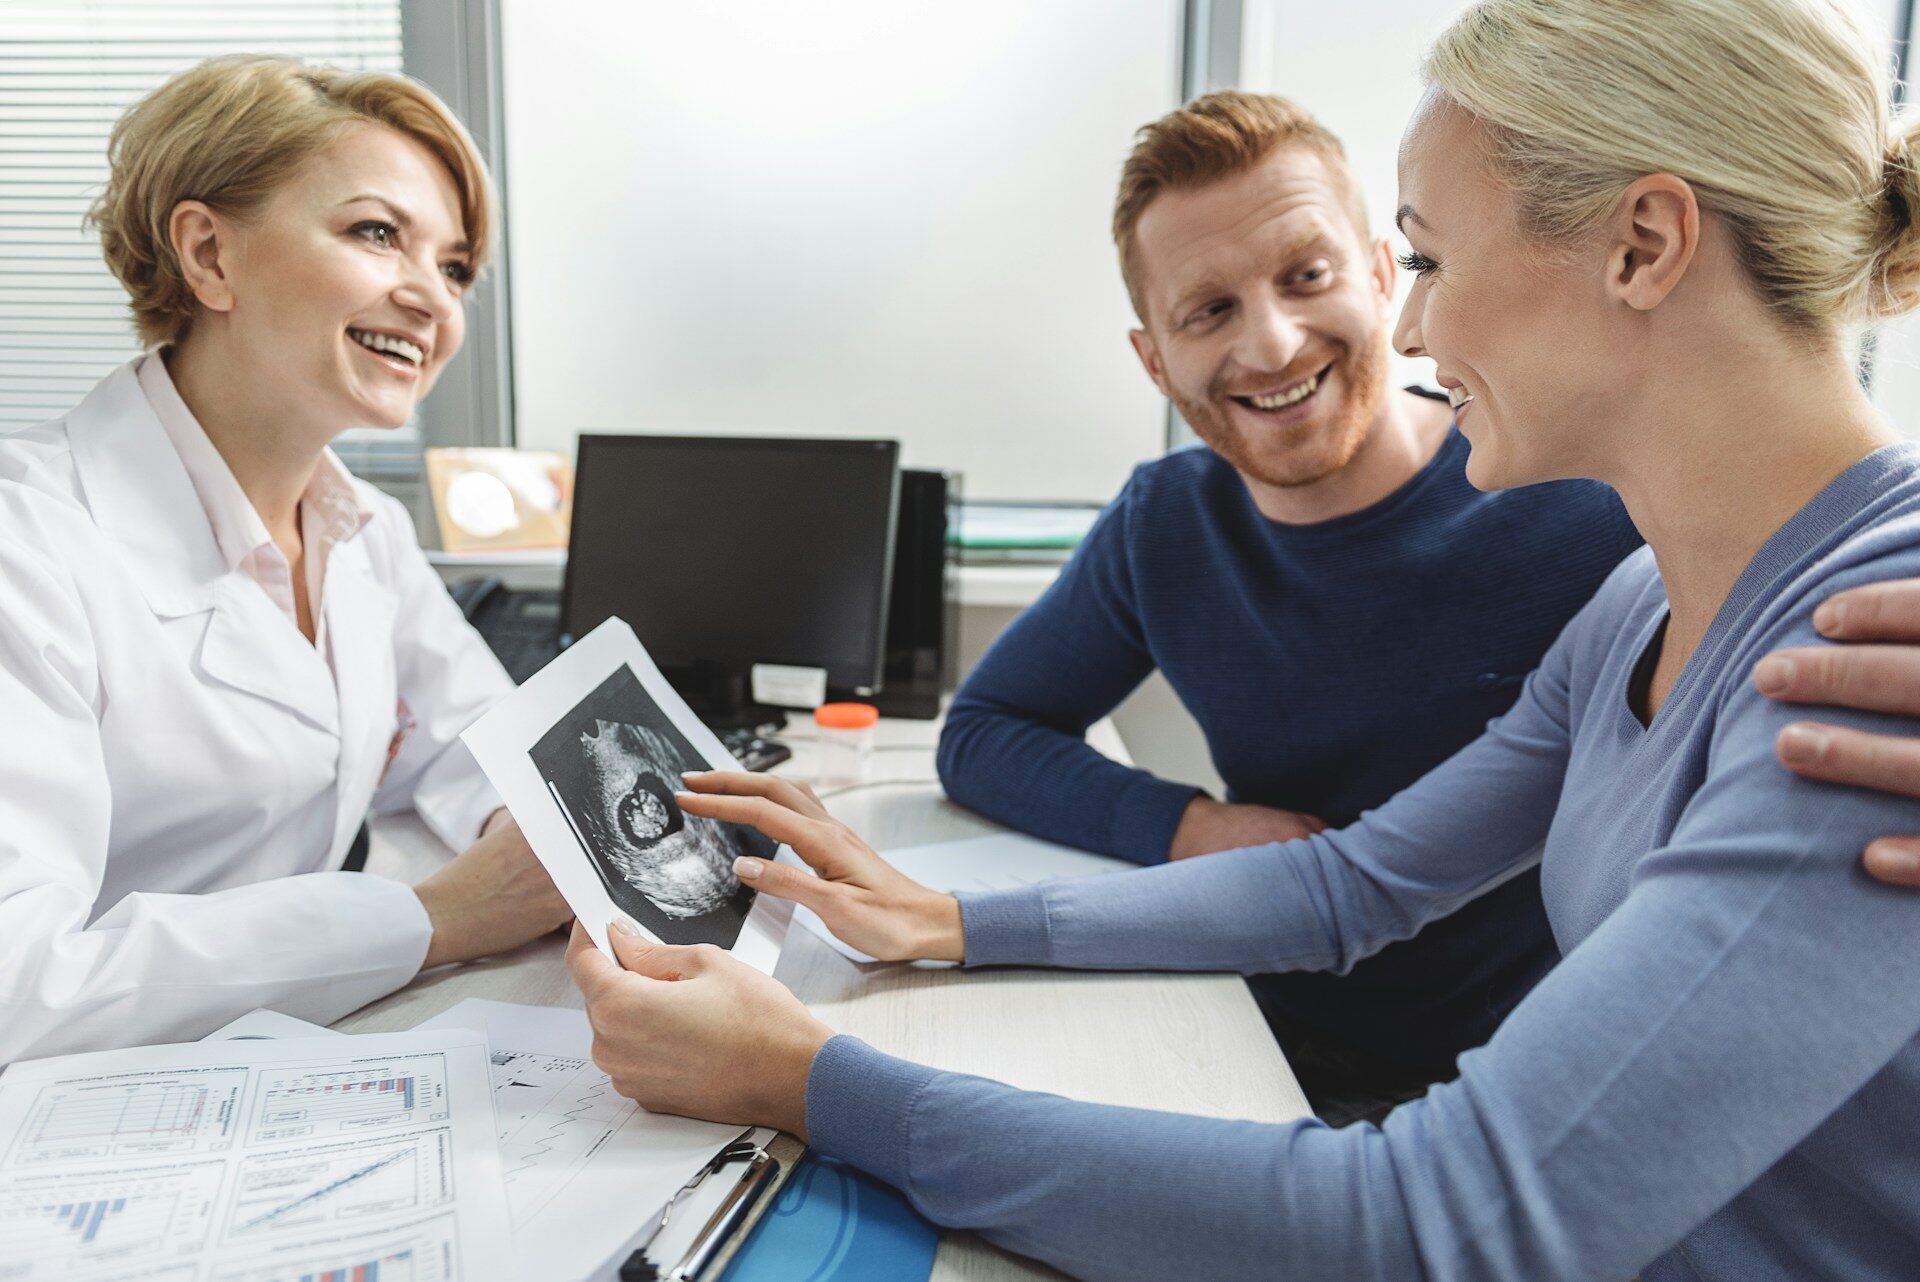 A couple checking an ultrasound image at a doctor's office